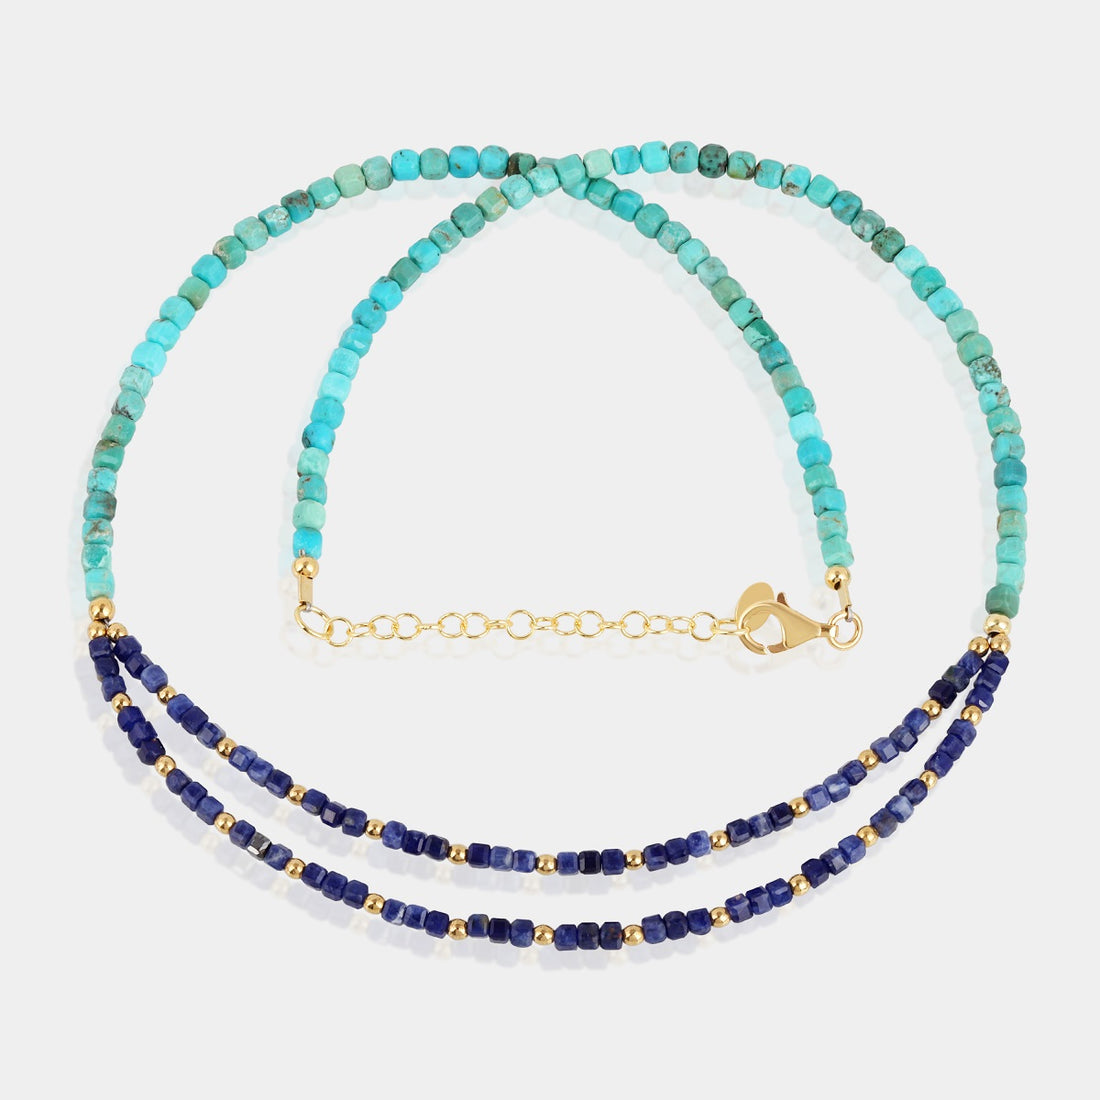 A beautiful blend of turquoise, sodalite, and hematite gemstone beads, handcrafted in sterling silver.